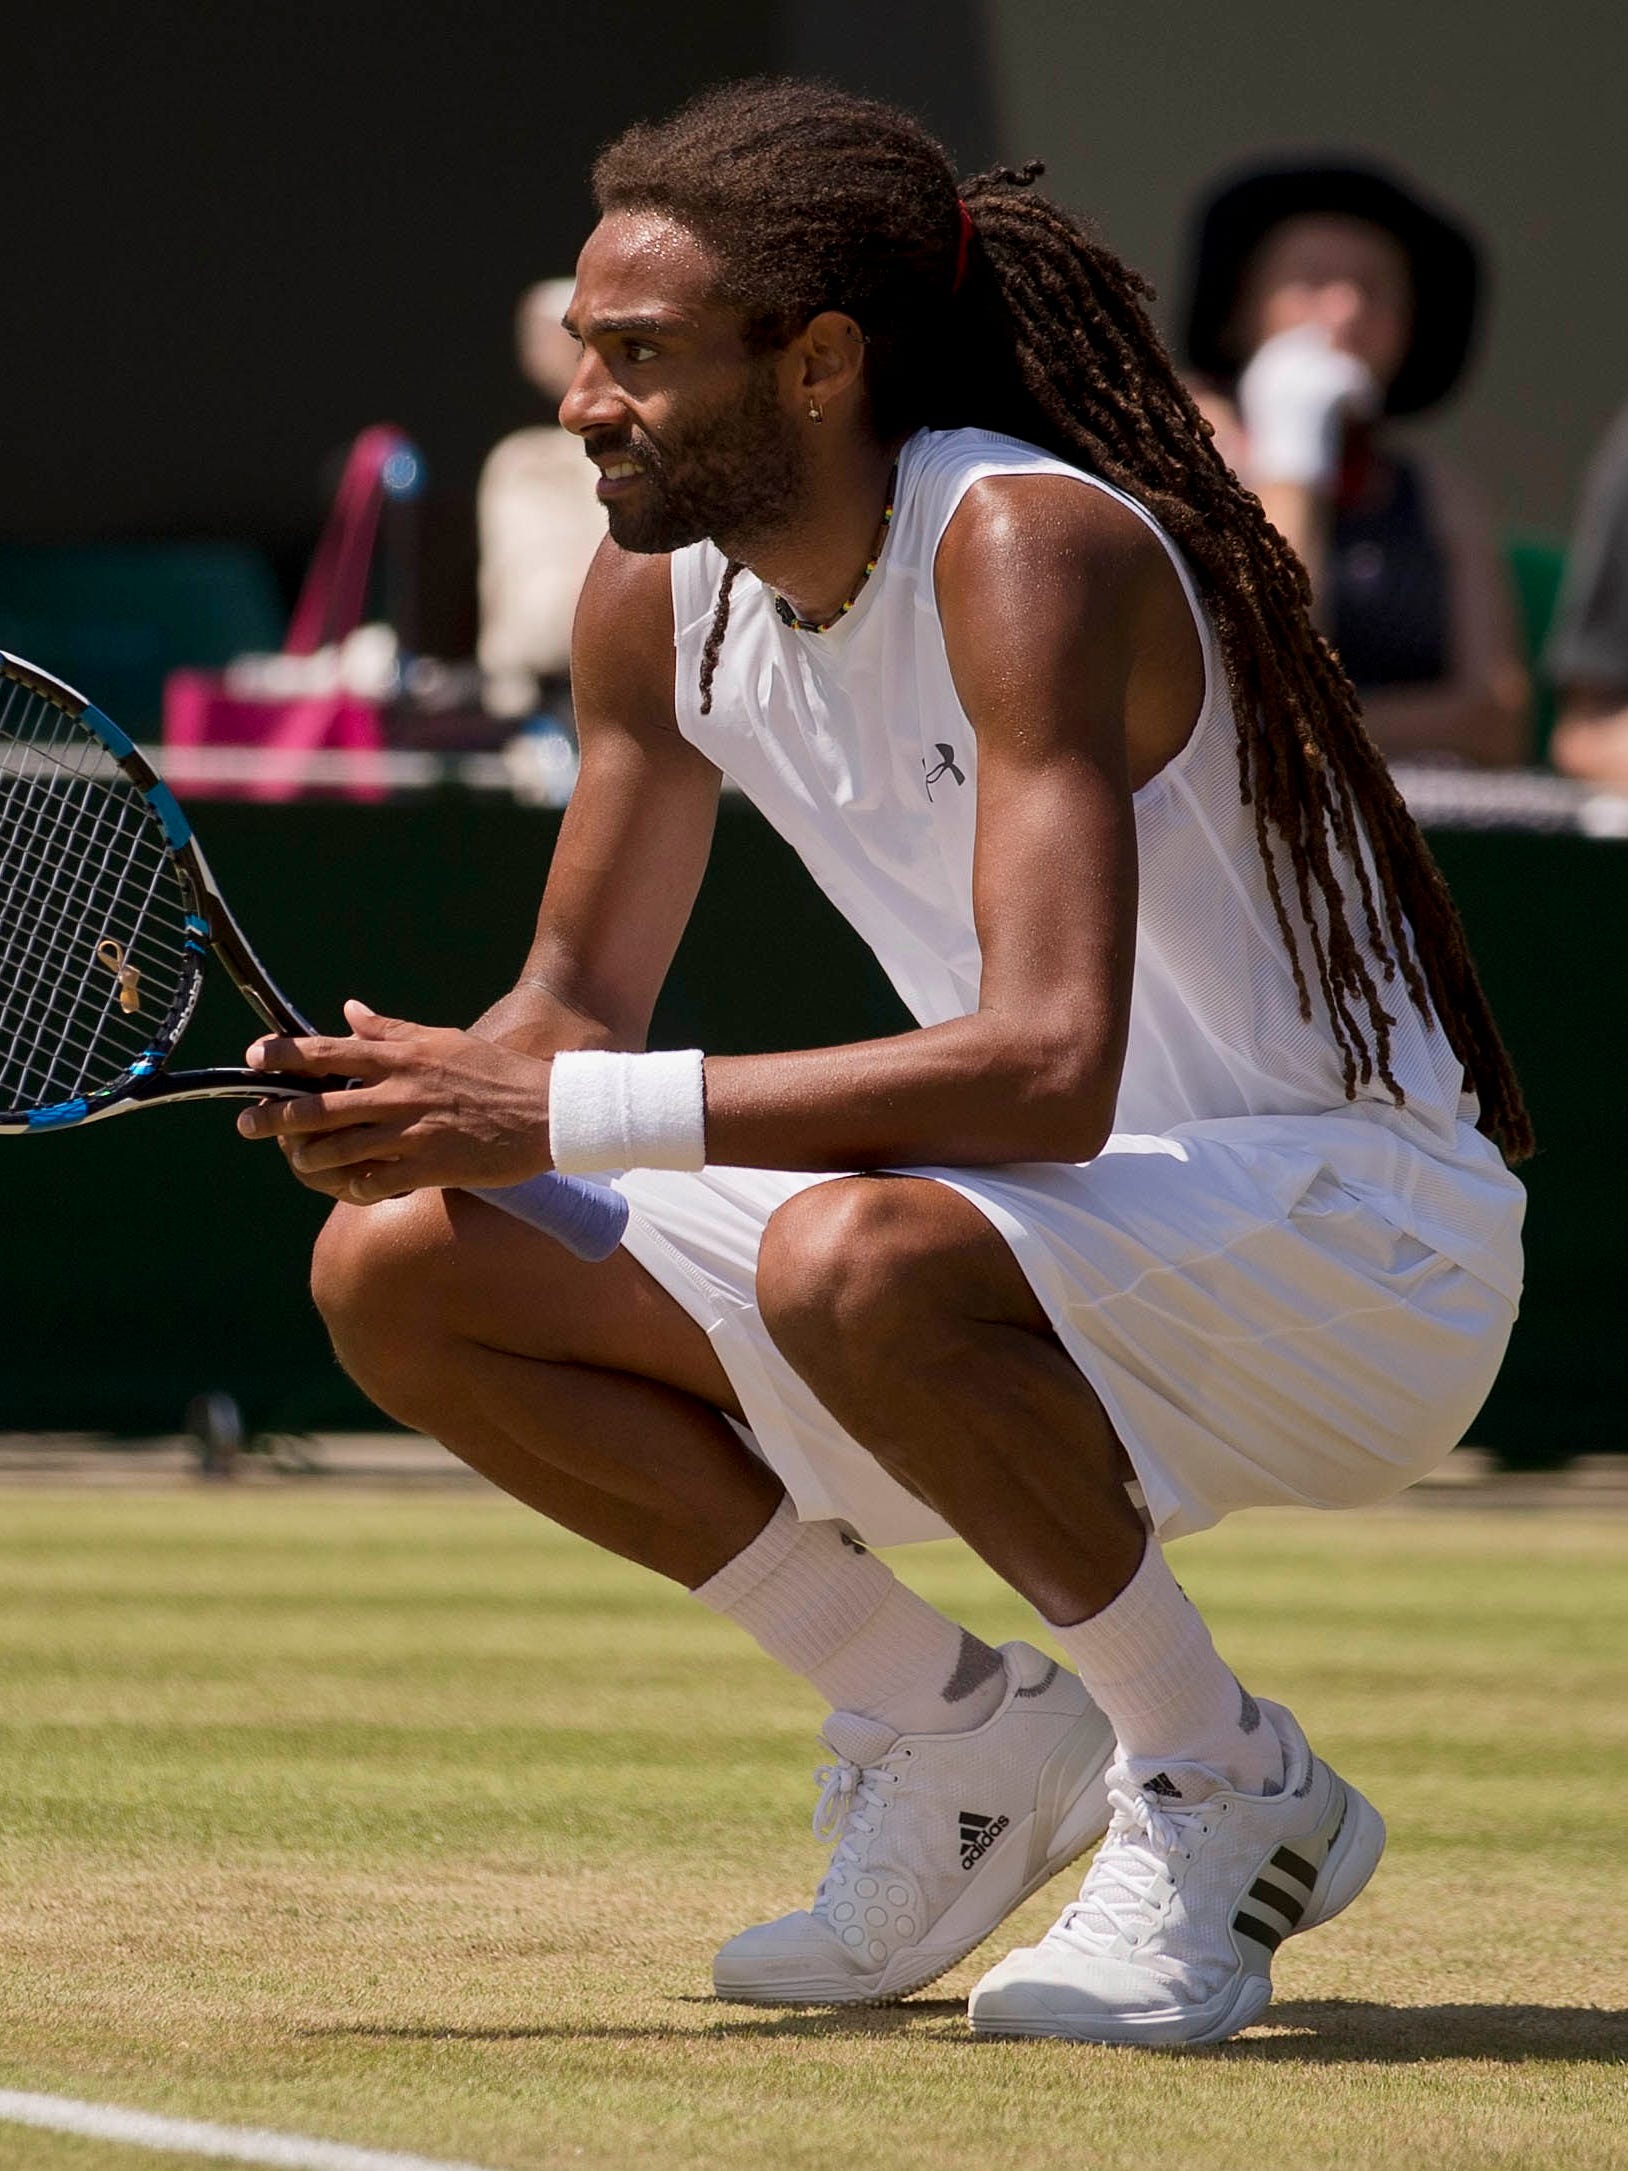 Dustin Brown Loses At Wimbledon Two Days After Upsetting Rafael Nadal